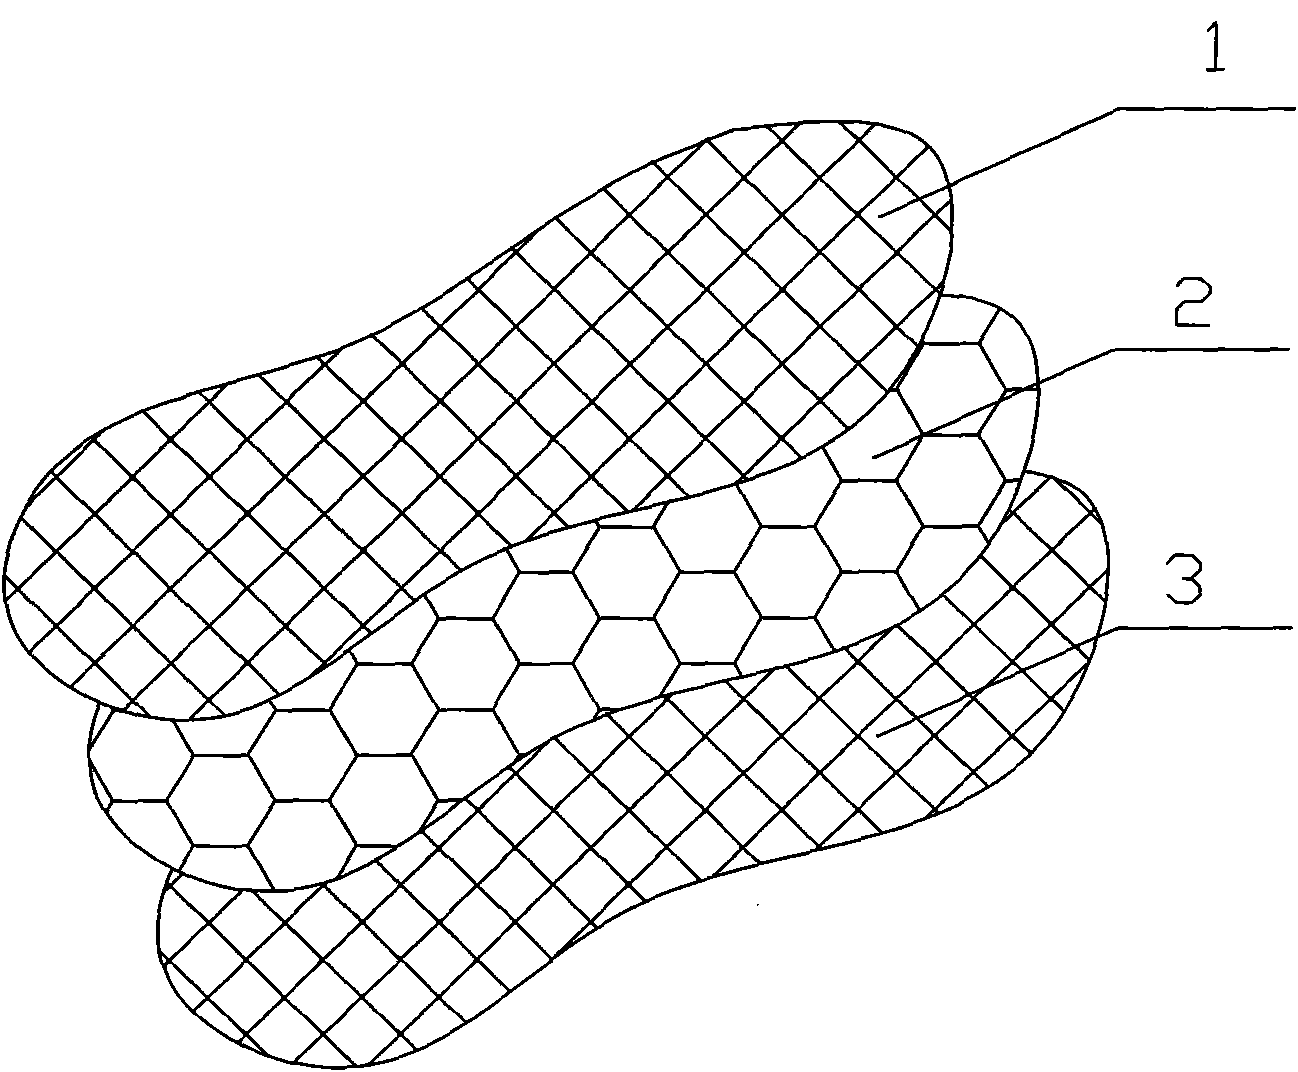 Multifunctional drug shoe pad capable of simultaneously carrying out pharmacotherapy, magnetotherapy and phototherapy